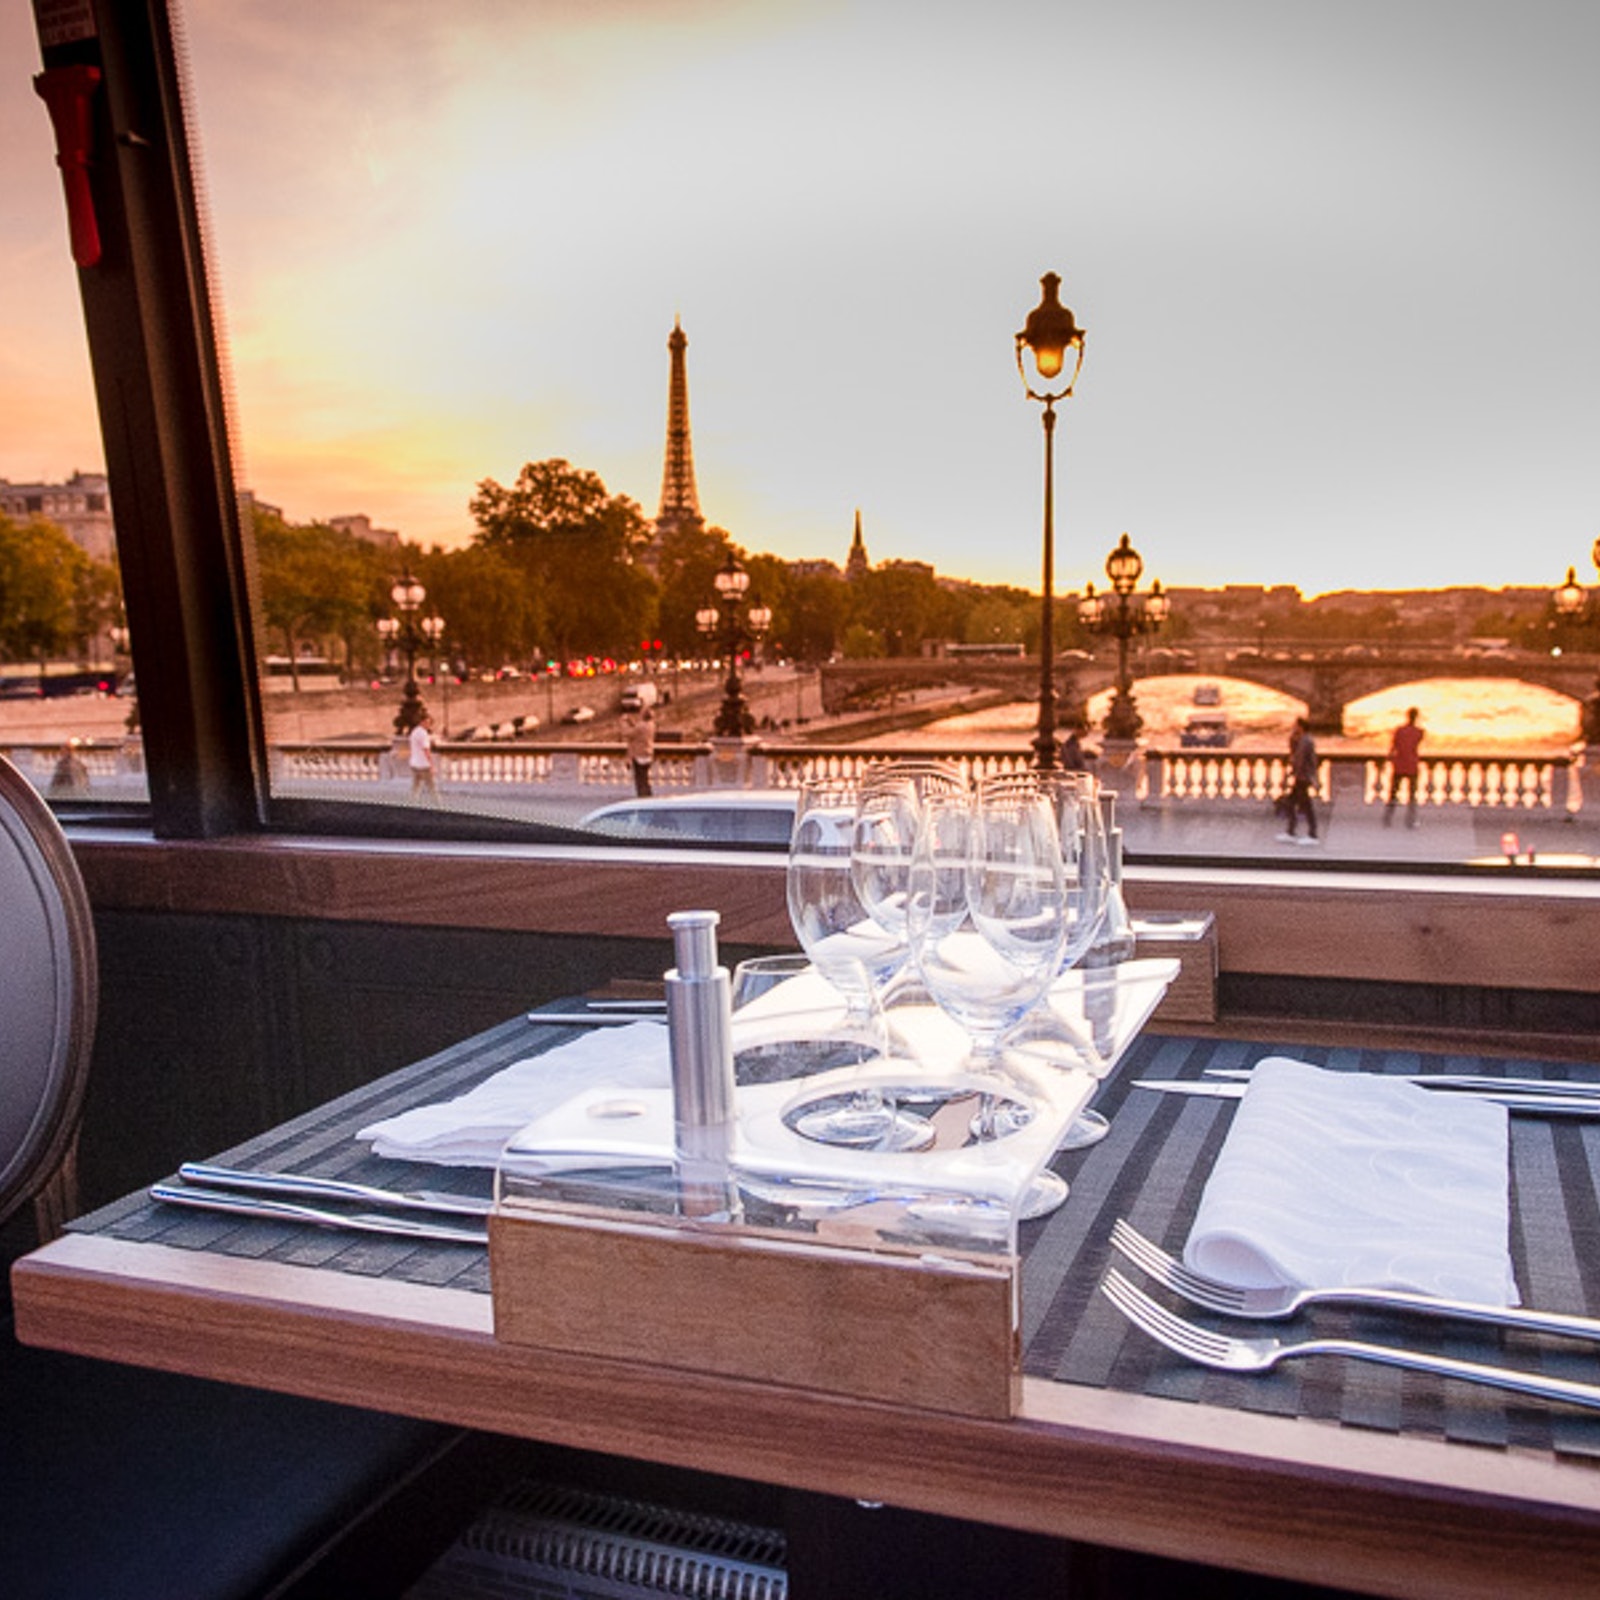 Gastronomic Dinner on the Bustronome (19:45) in France